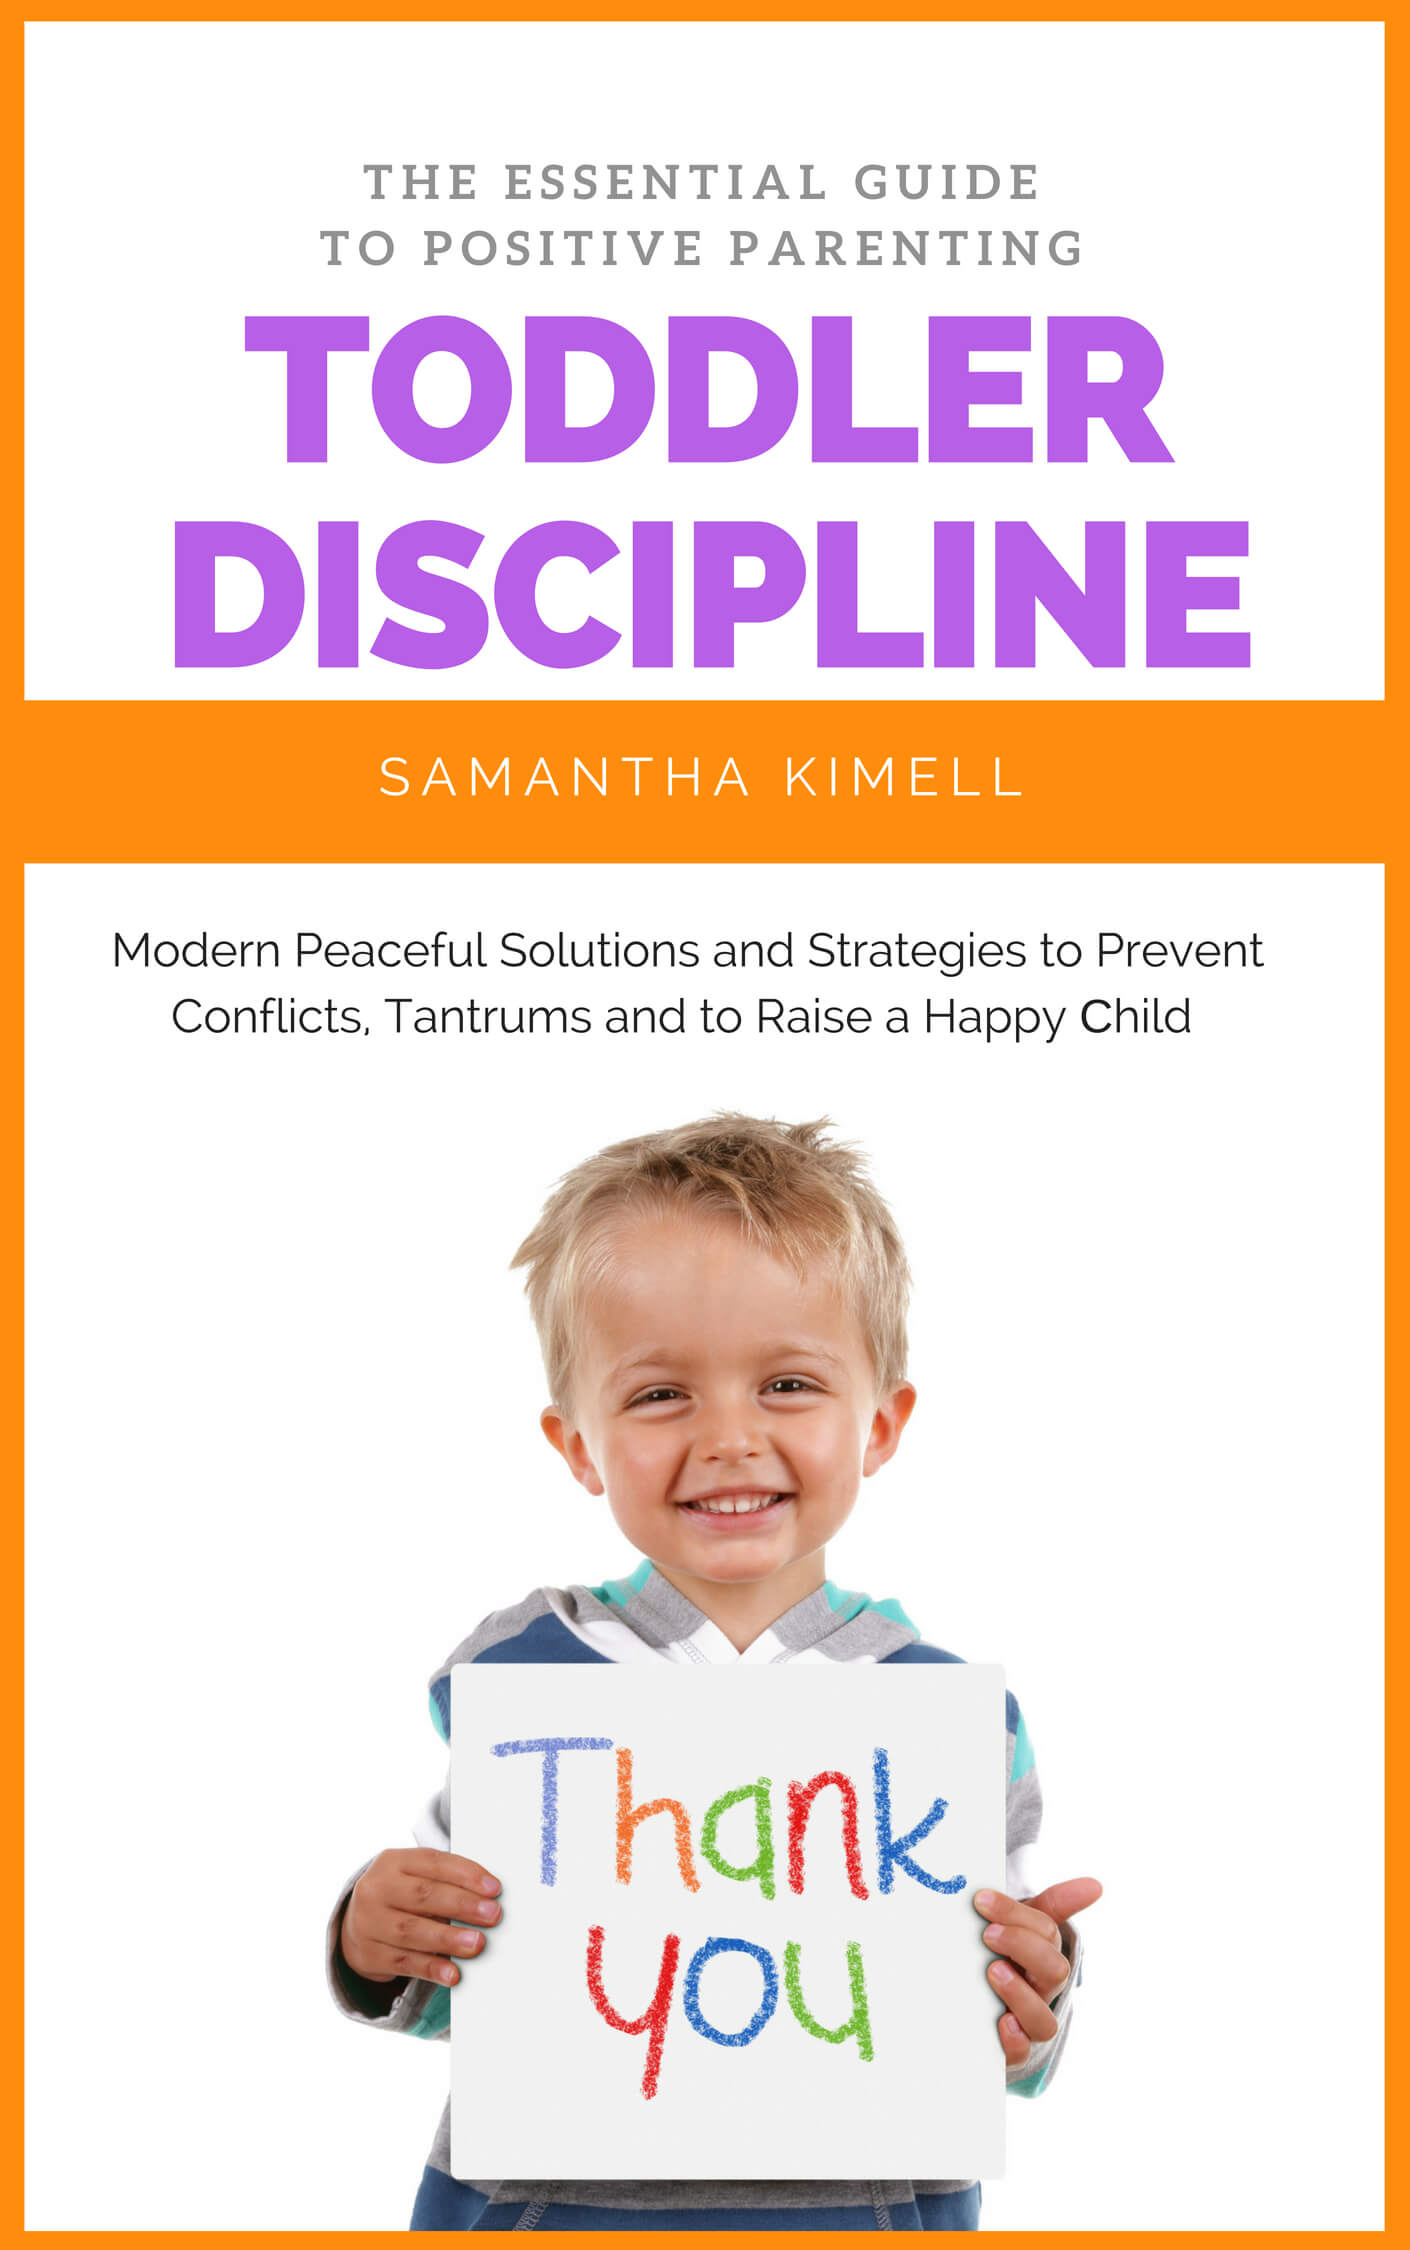 FREE: Toddler Discipline: The Essential Guide to Positive Parenting: Peaceful Solutions and Strategies to Prevent Conflicts, Tantrums and to Raise a Happy Child by Samantha Kimell